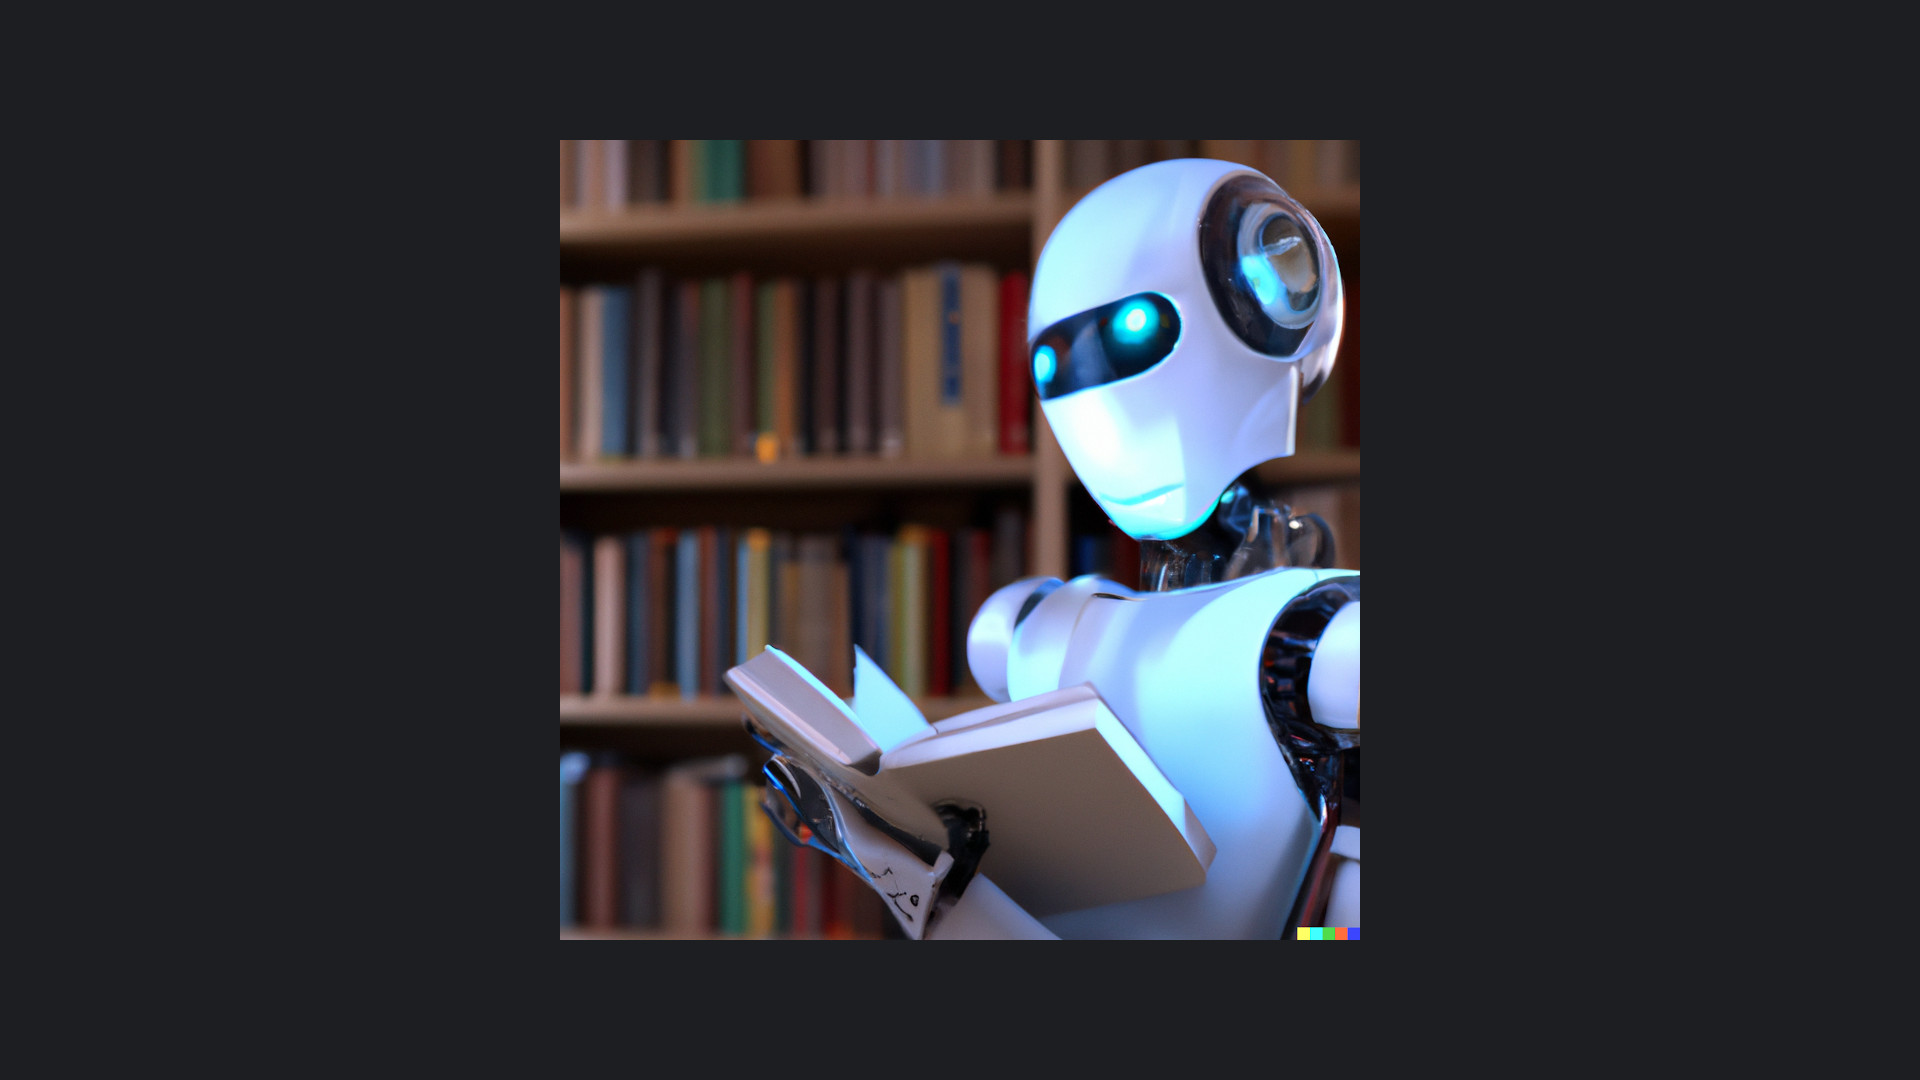 a very modern looking Android reading a book in a library